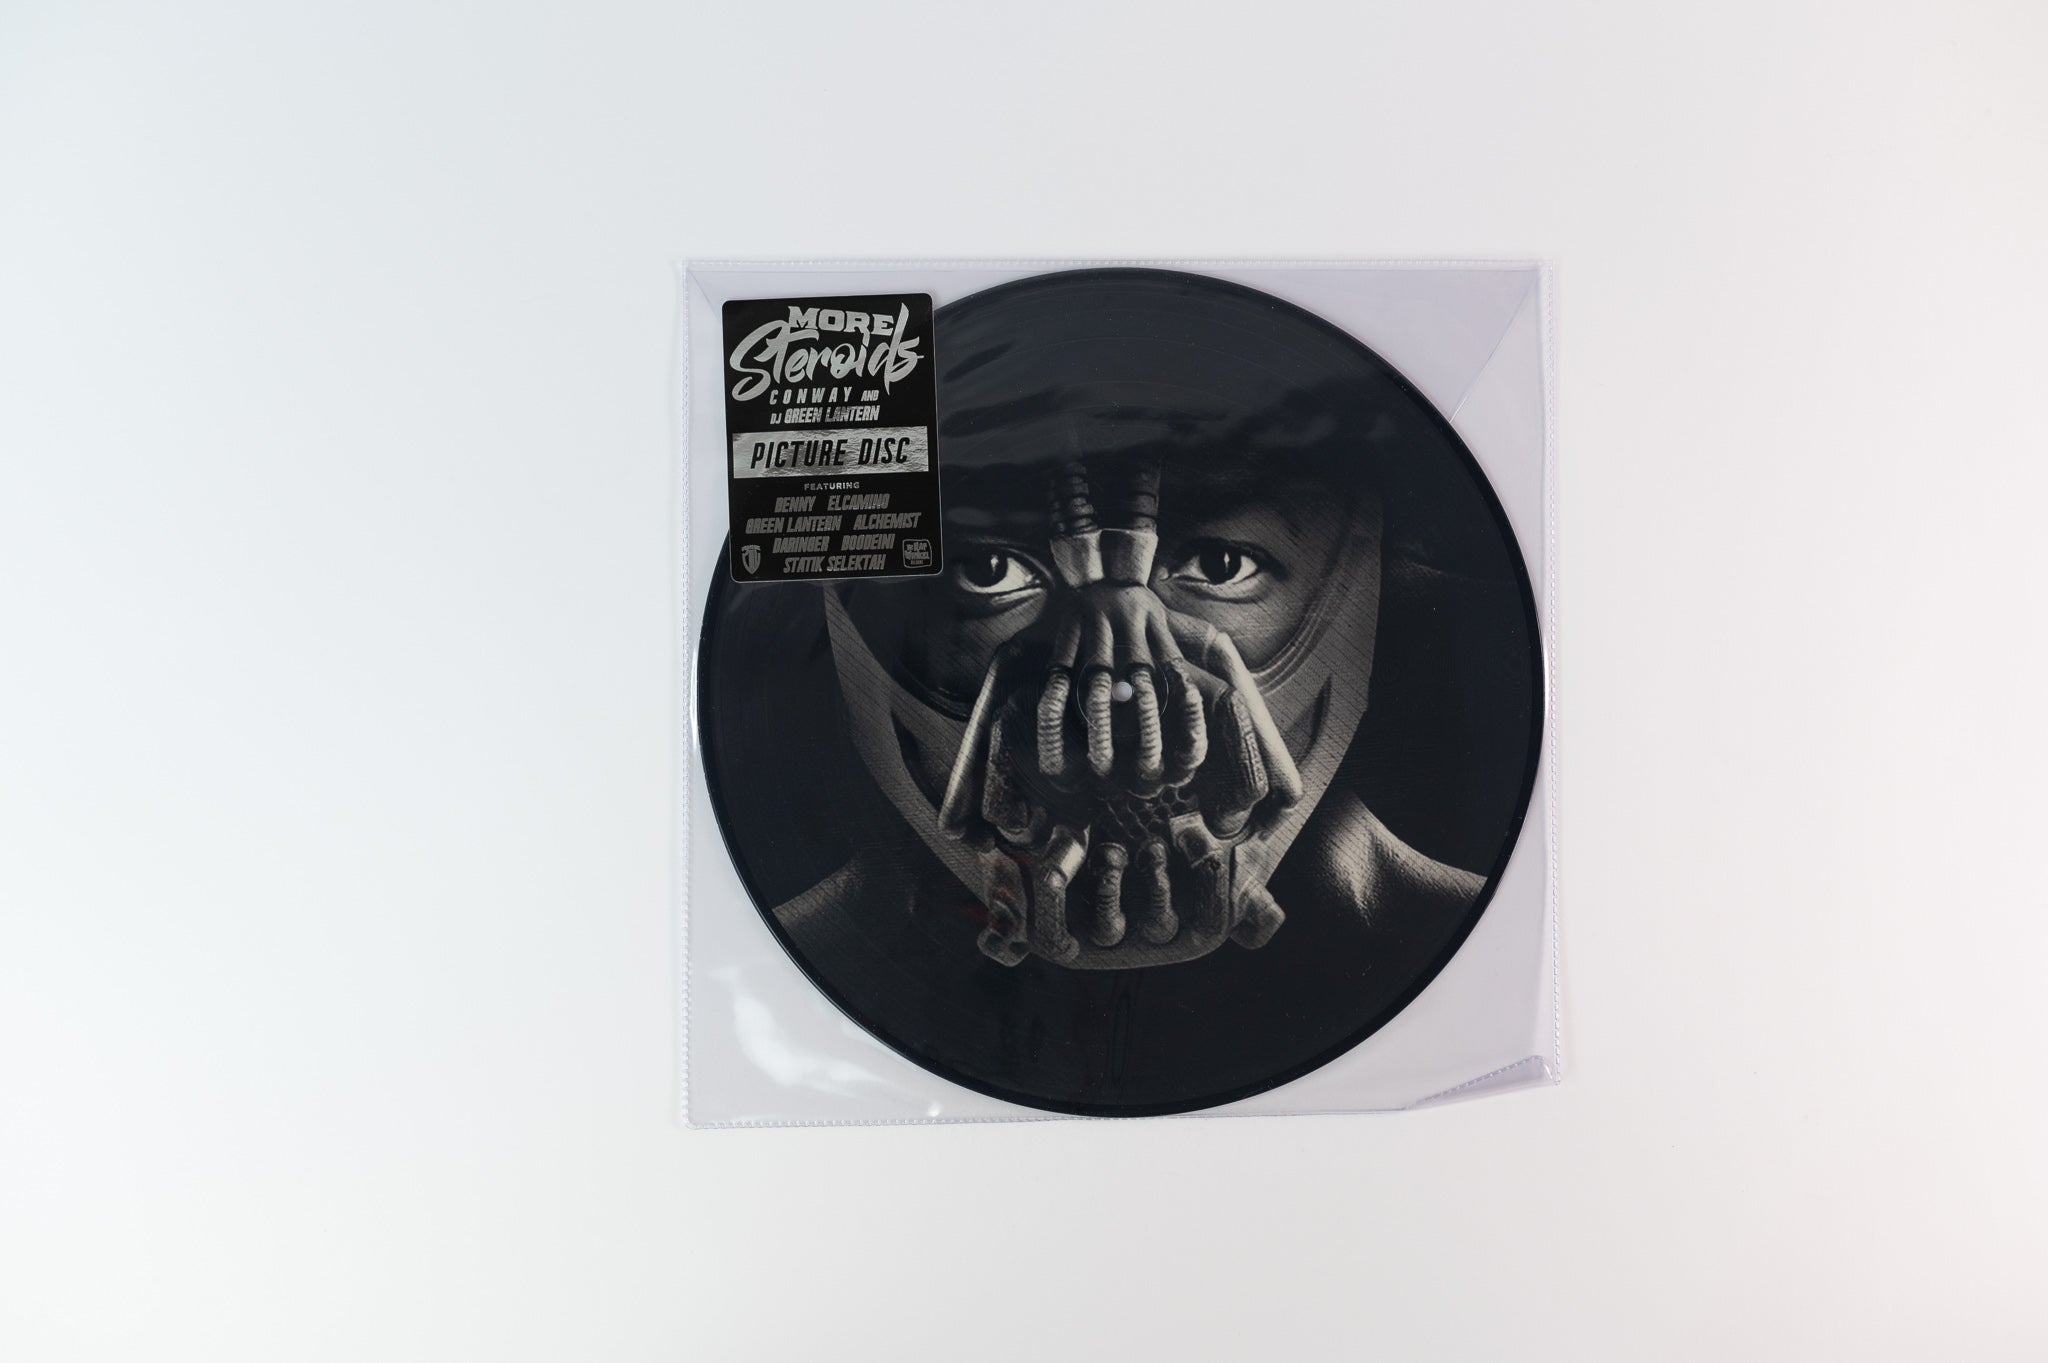 Conway - More Steroids on de Rap Winkel Limited Numbered Dutch Picture Disc